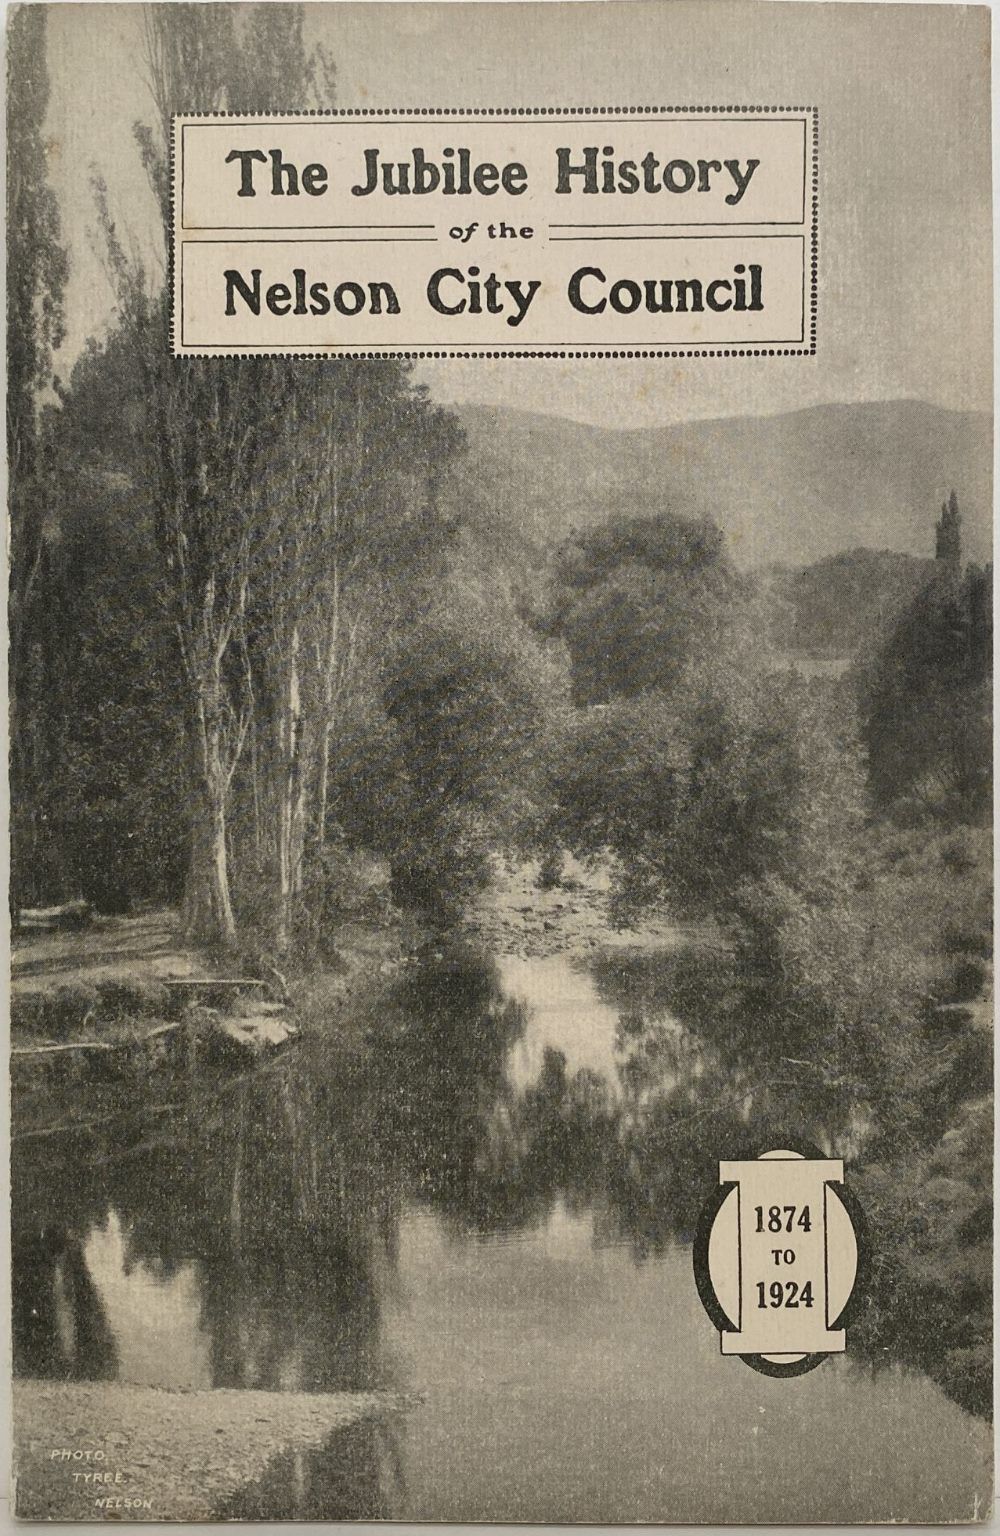 The Jubilee History of the NELSON CITY COUNCIL 1874 to 1924